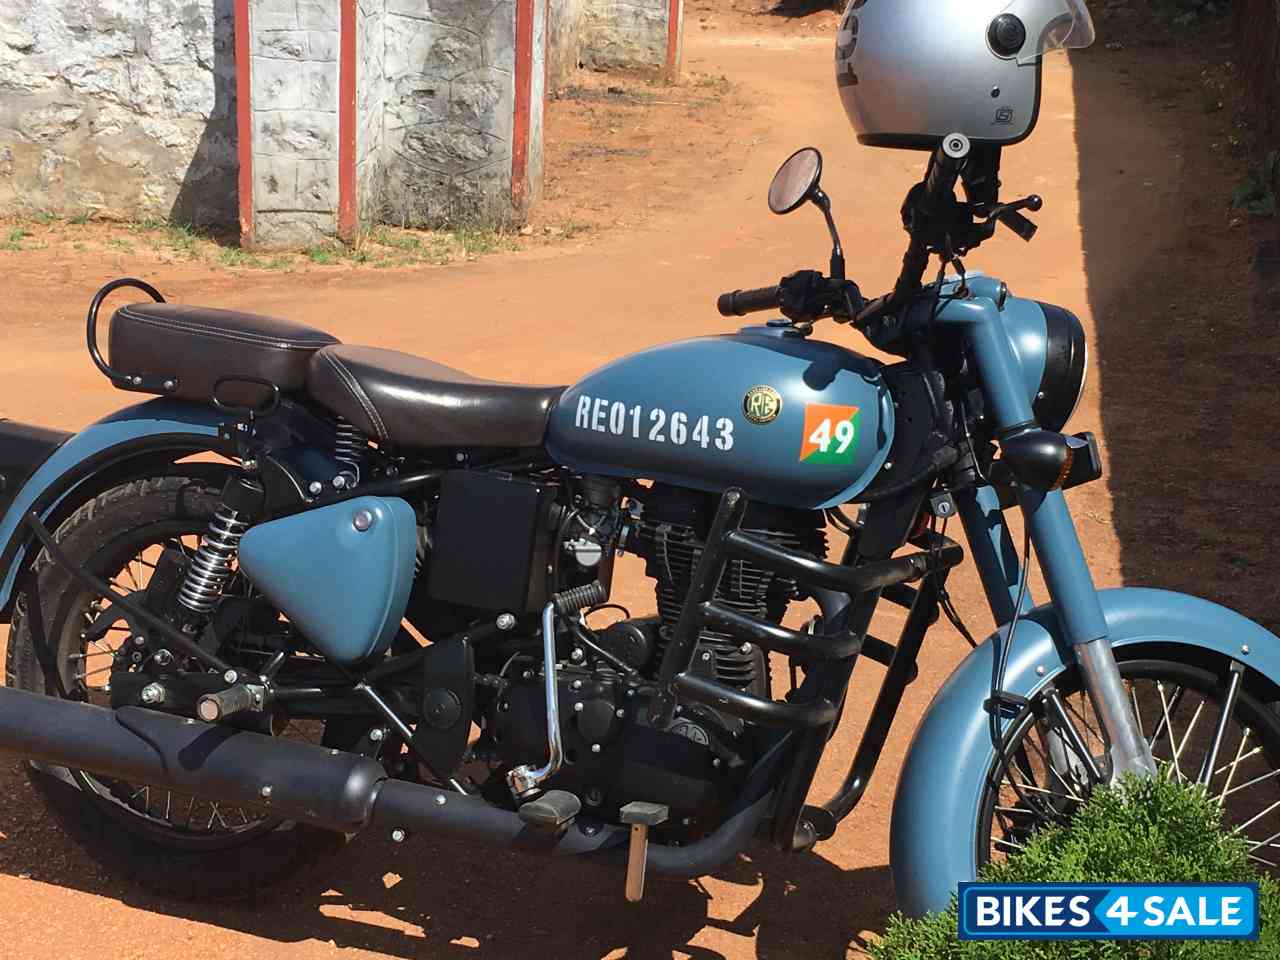 Royal Enfield Classic Signals Airborne Blue